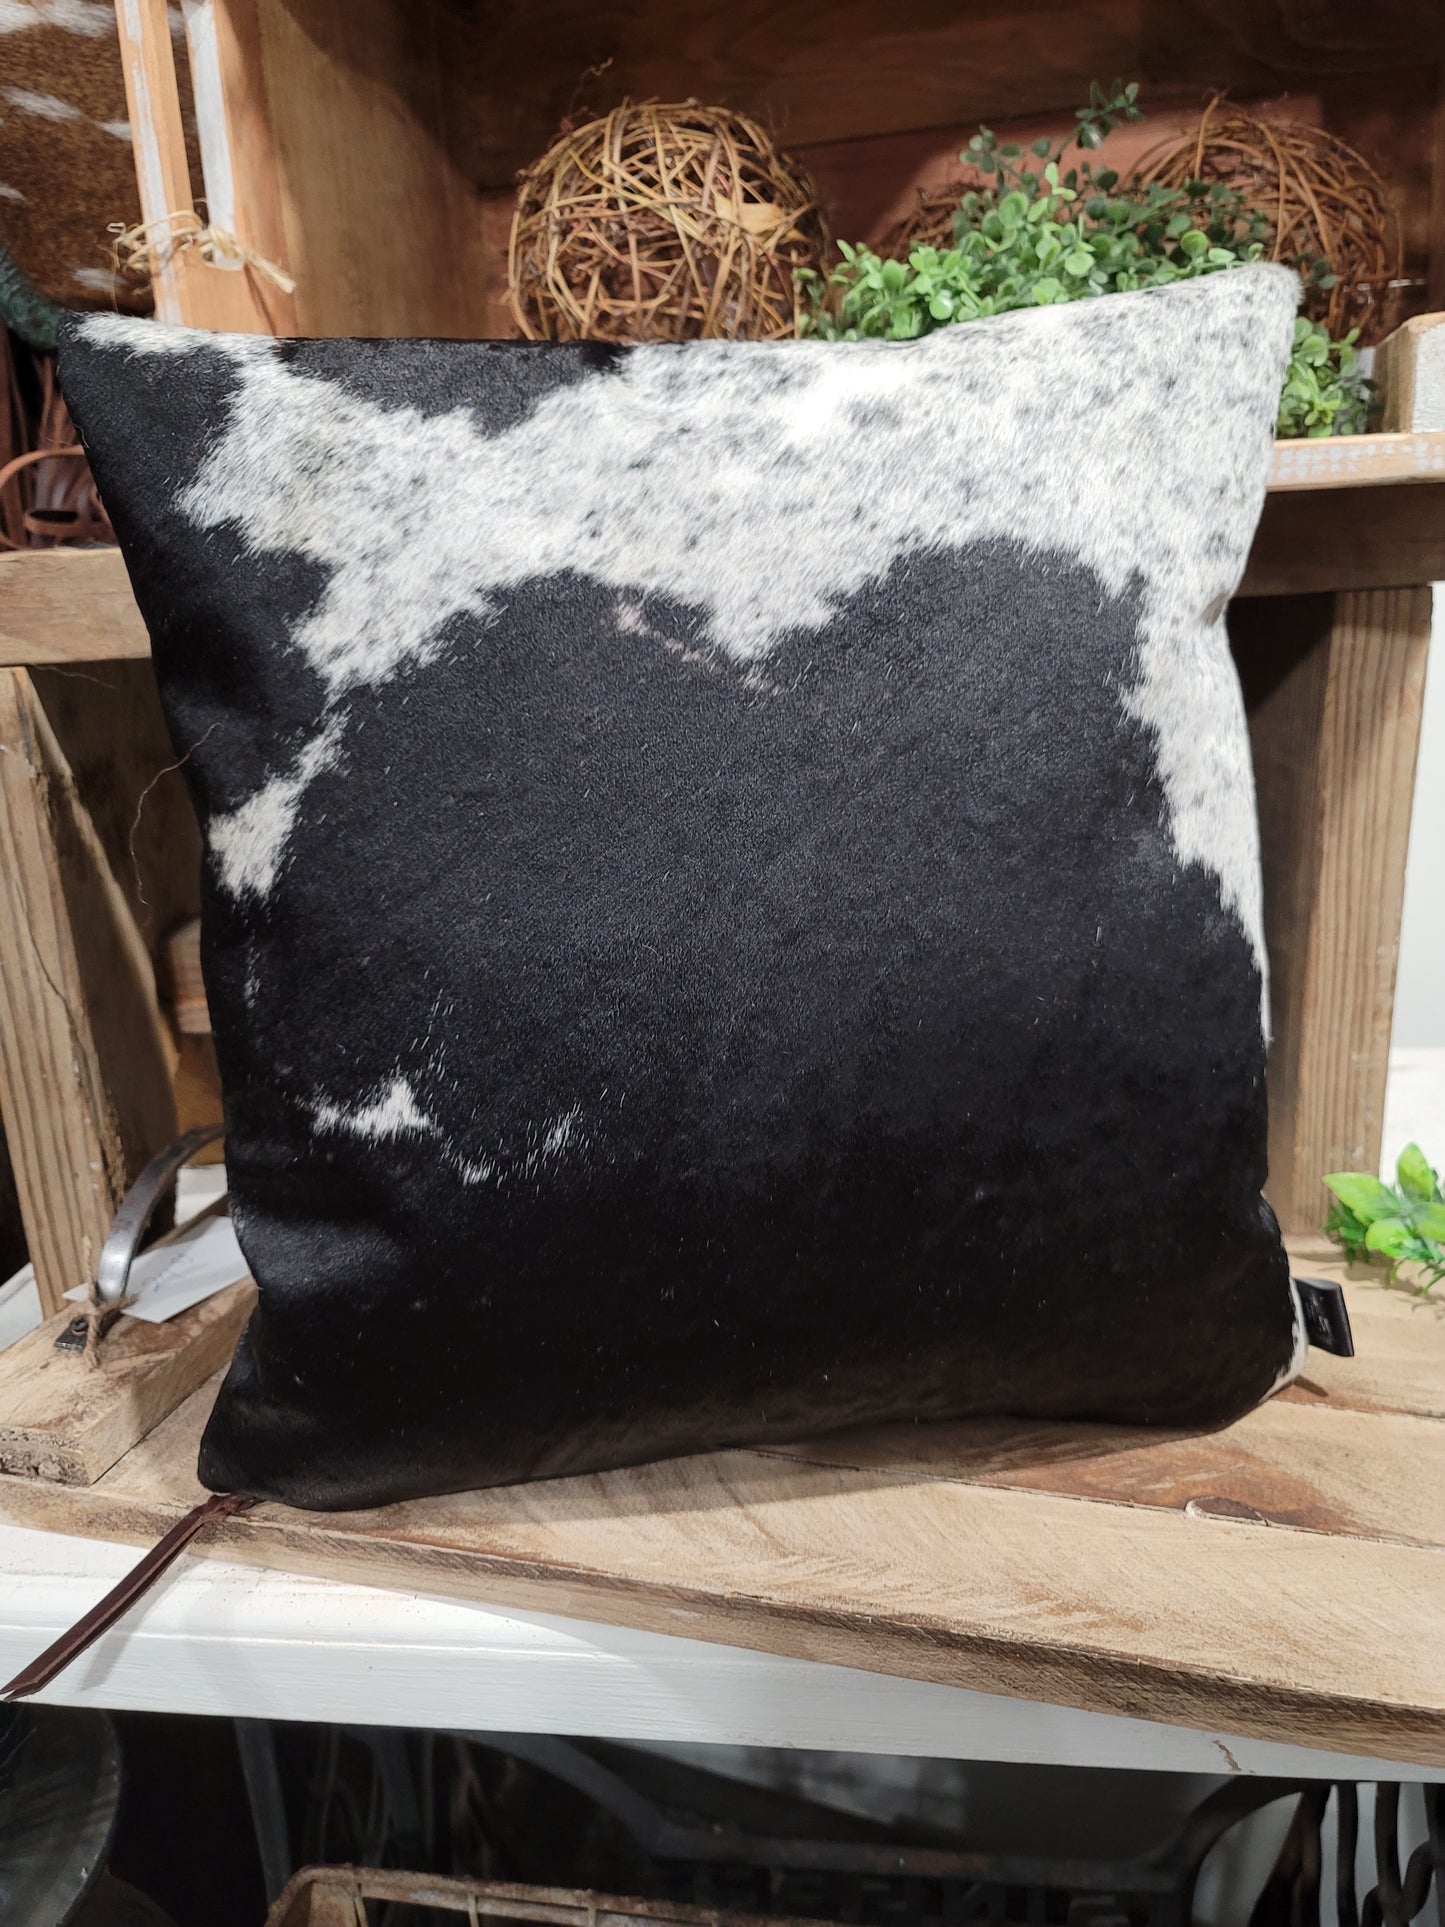 Western Leather Pillow, Black and White 16x16